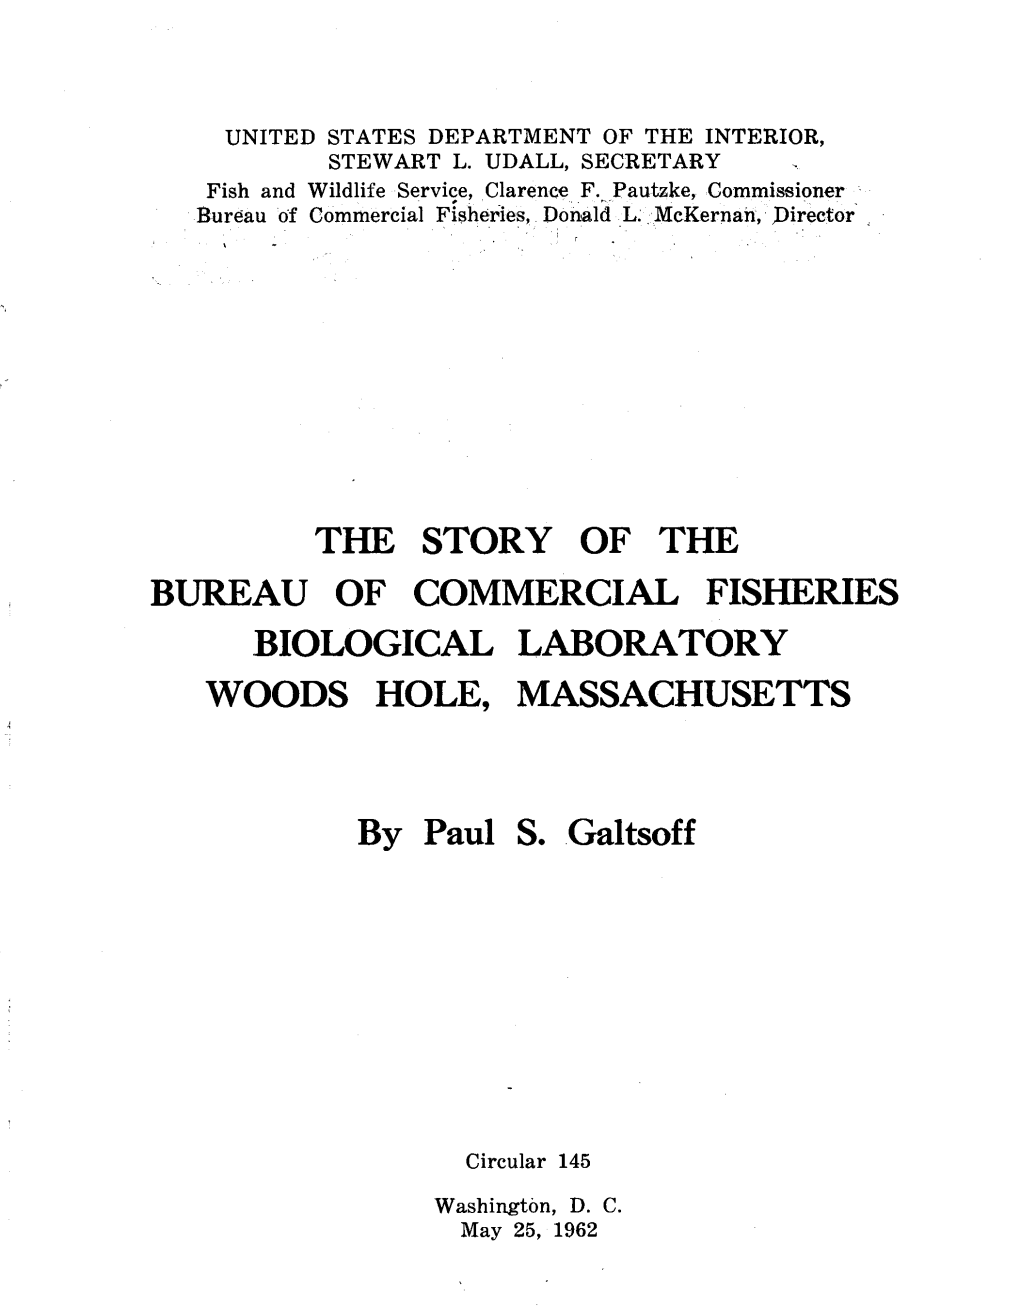 The Story of the Bureau of Commercial Fisheries Biological Laboratory Woods Hole, Massachusetts